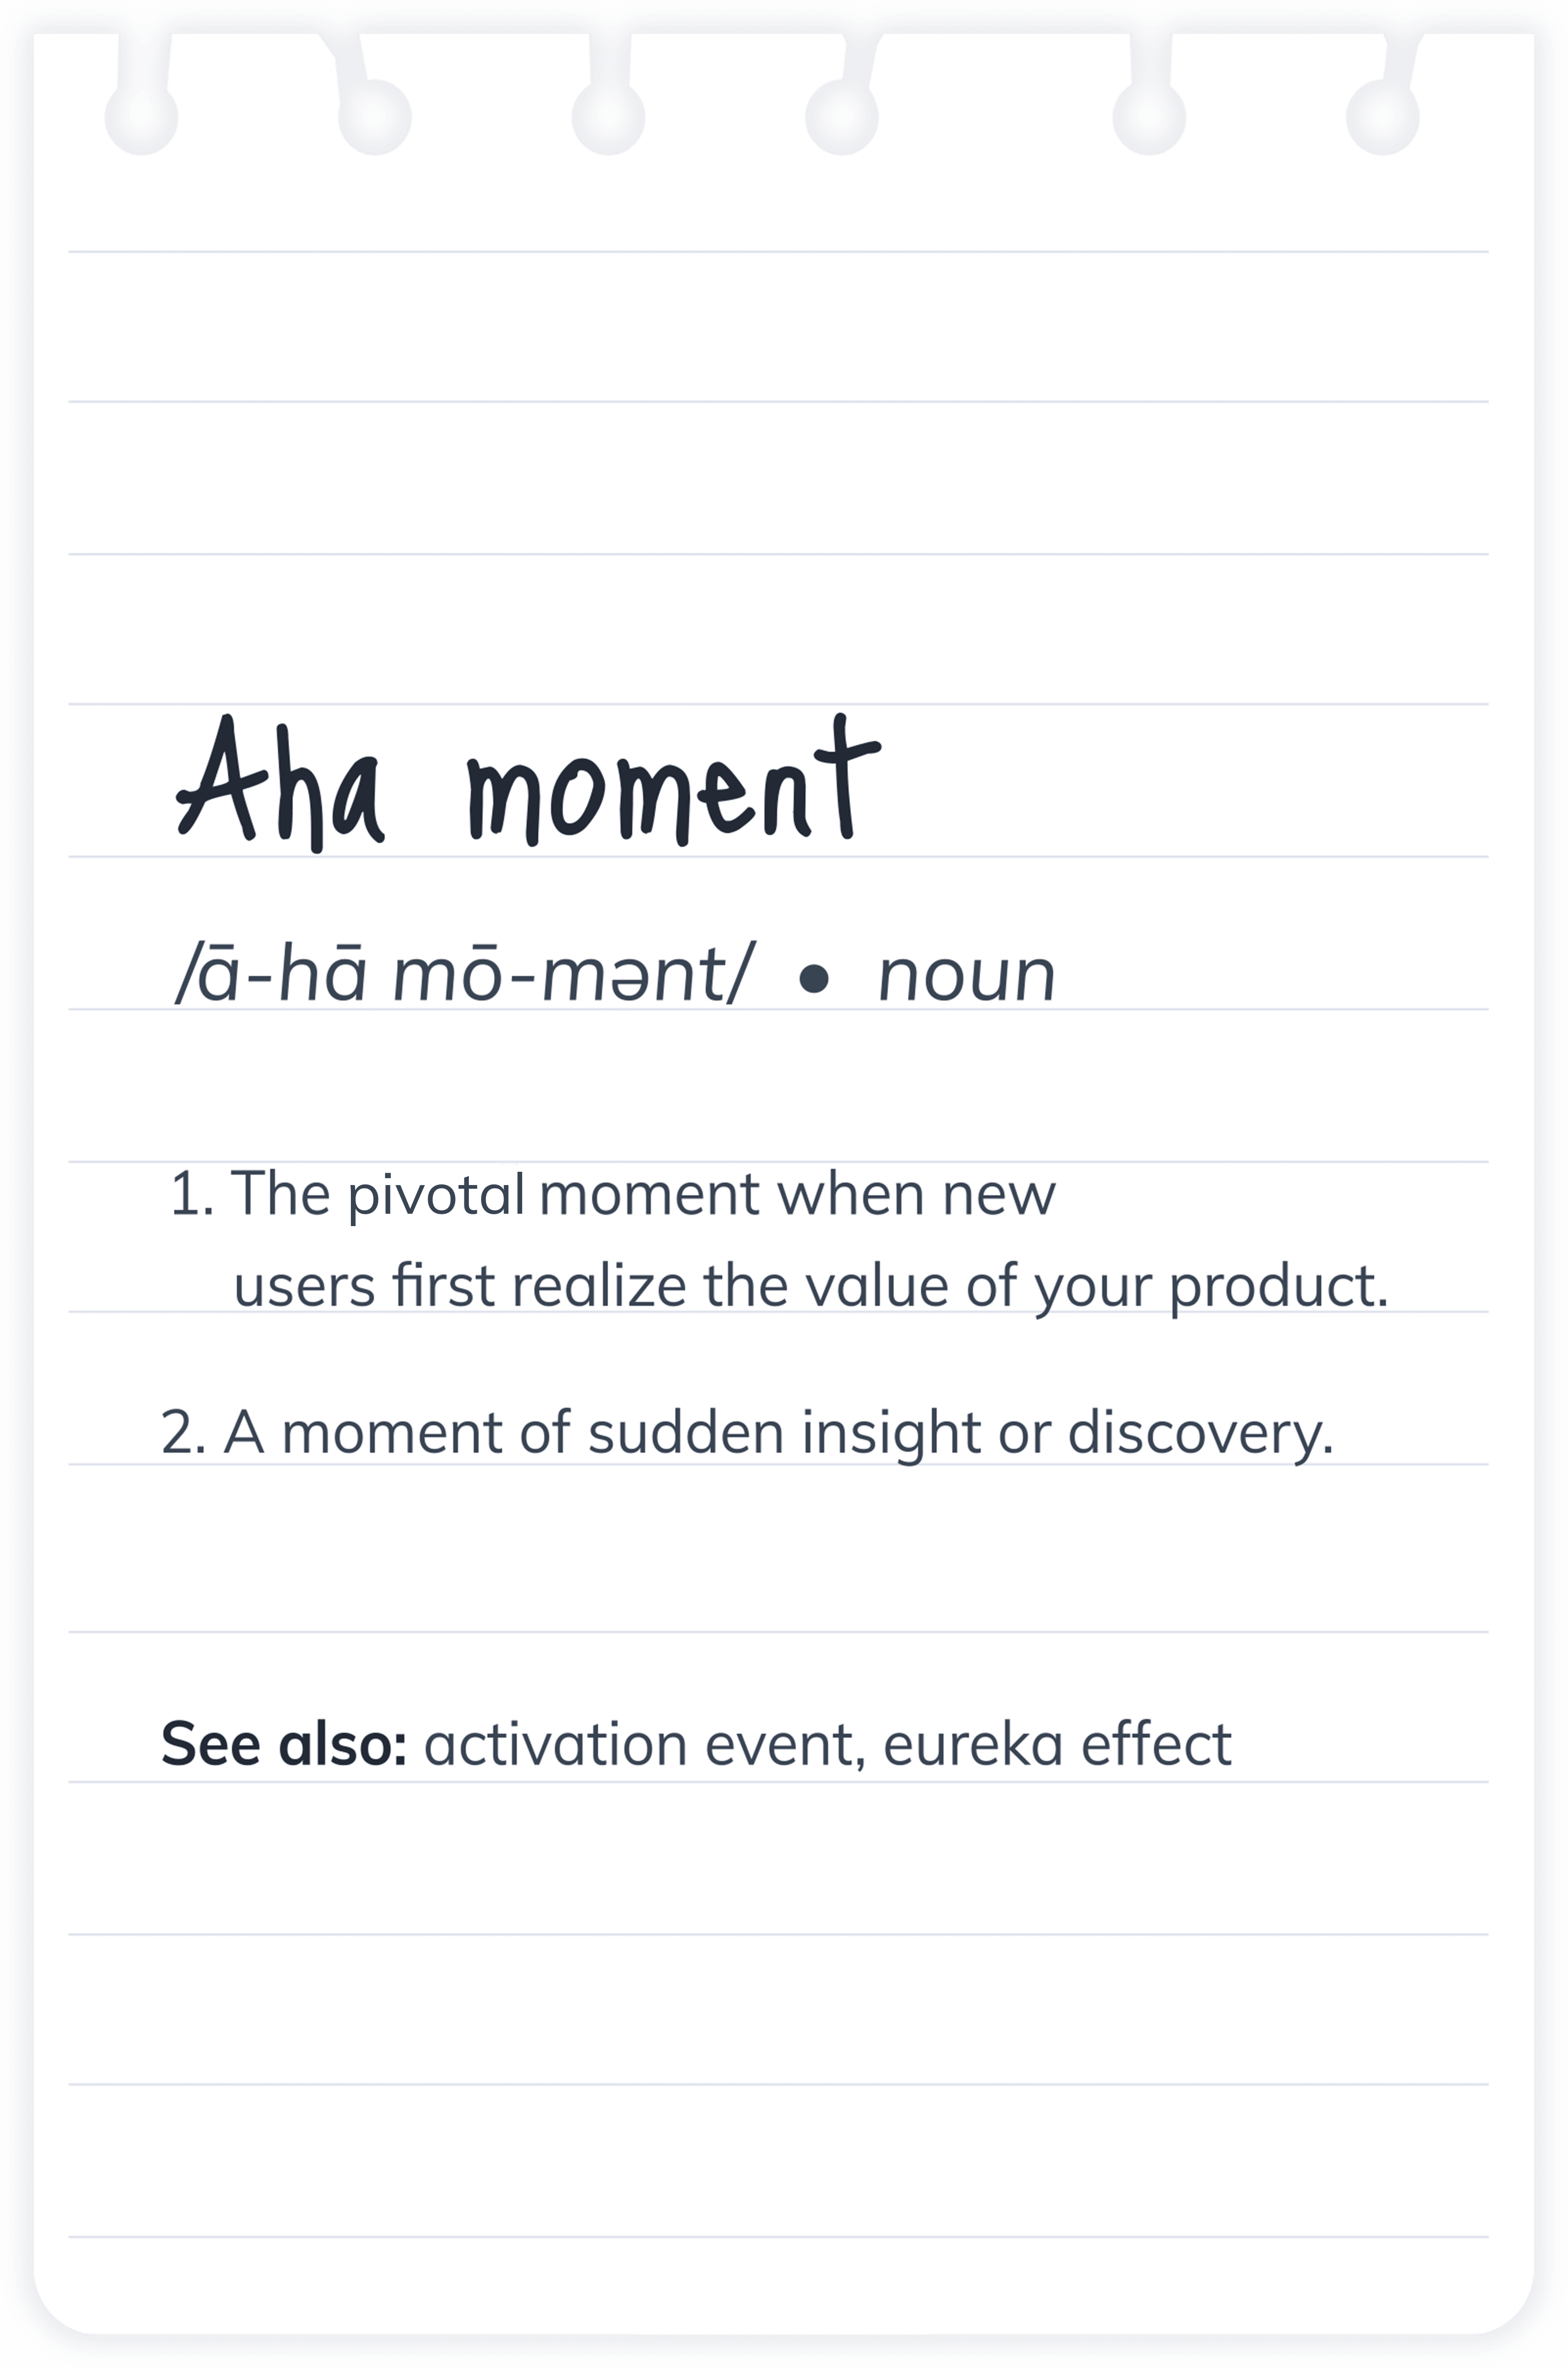 Aha moment definition - the pivotal moment when new users first realize the value of your product.